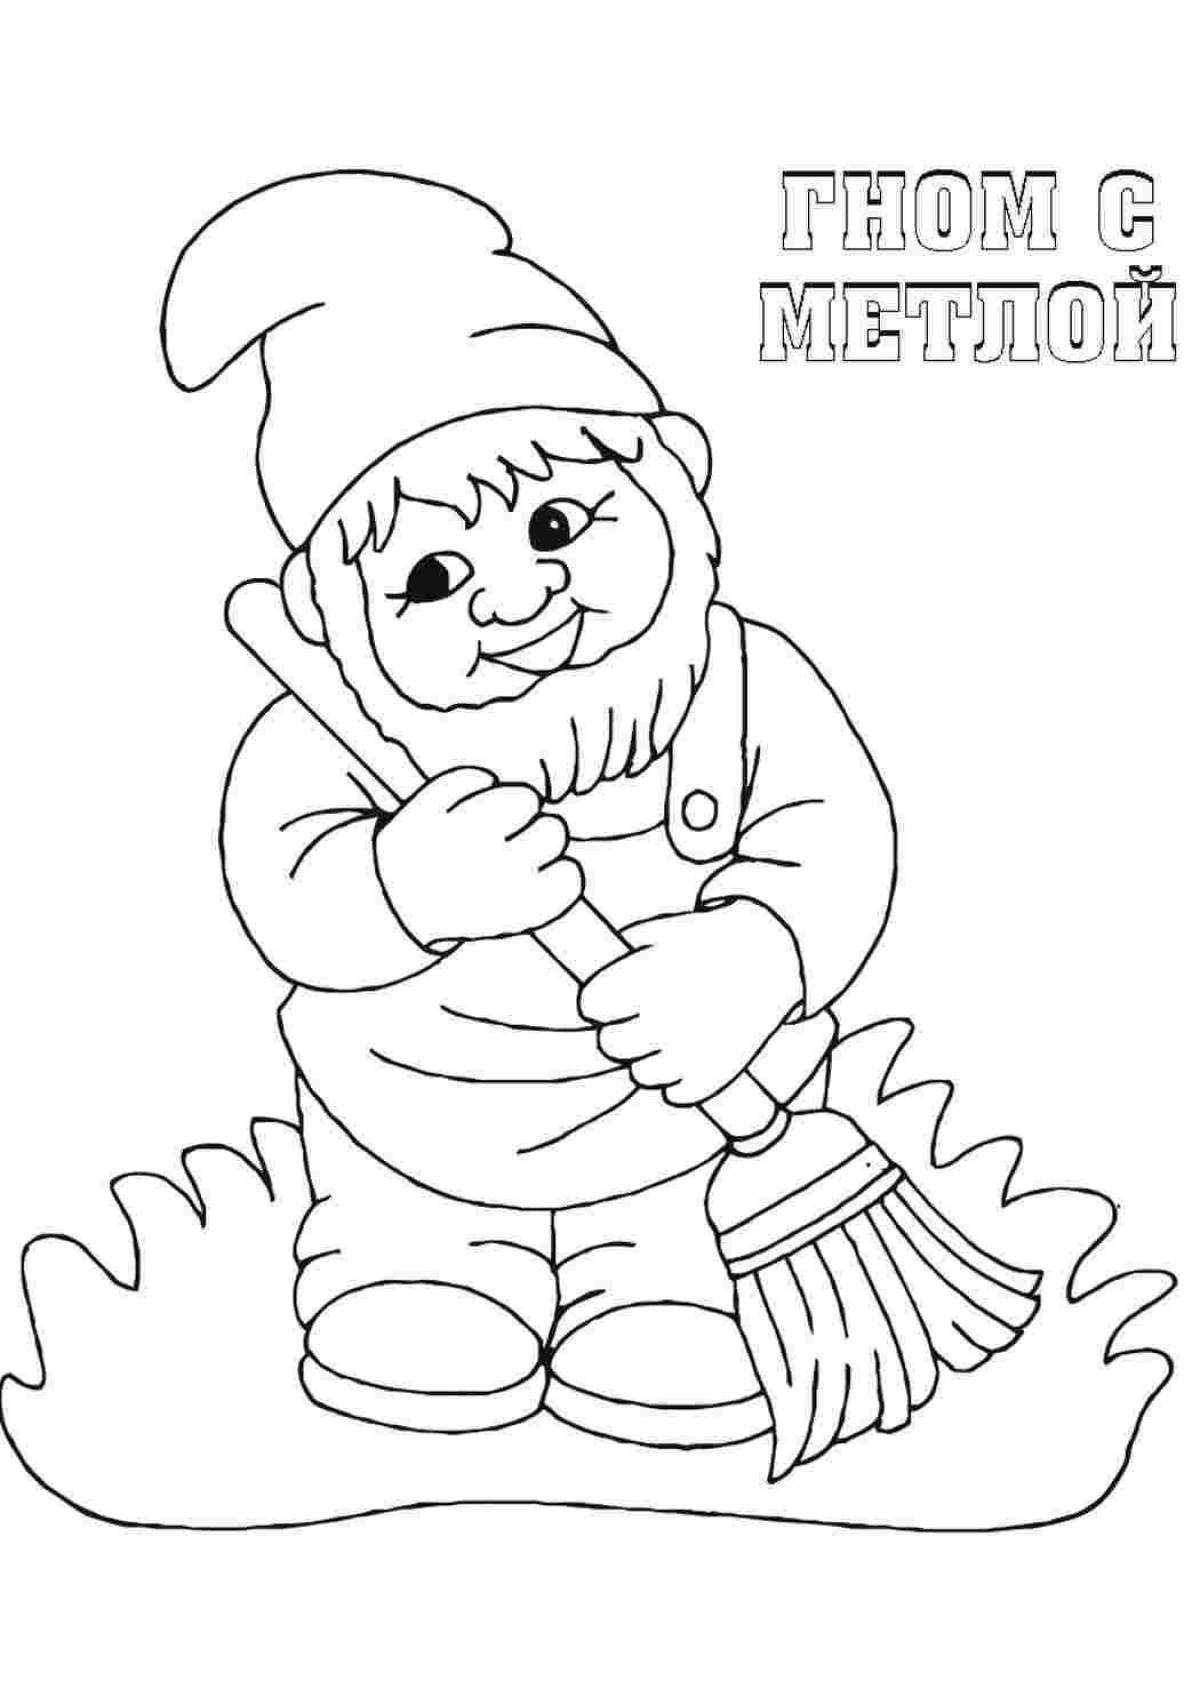 Coloring book gorgeous dwarf for the new year